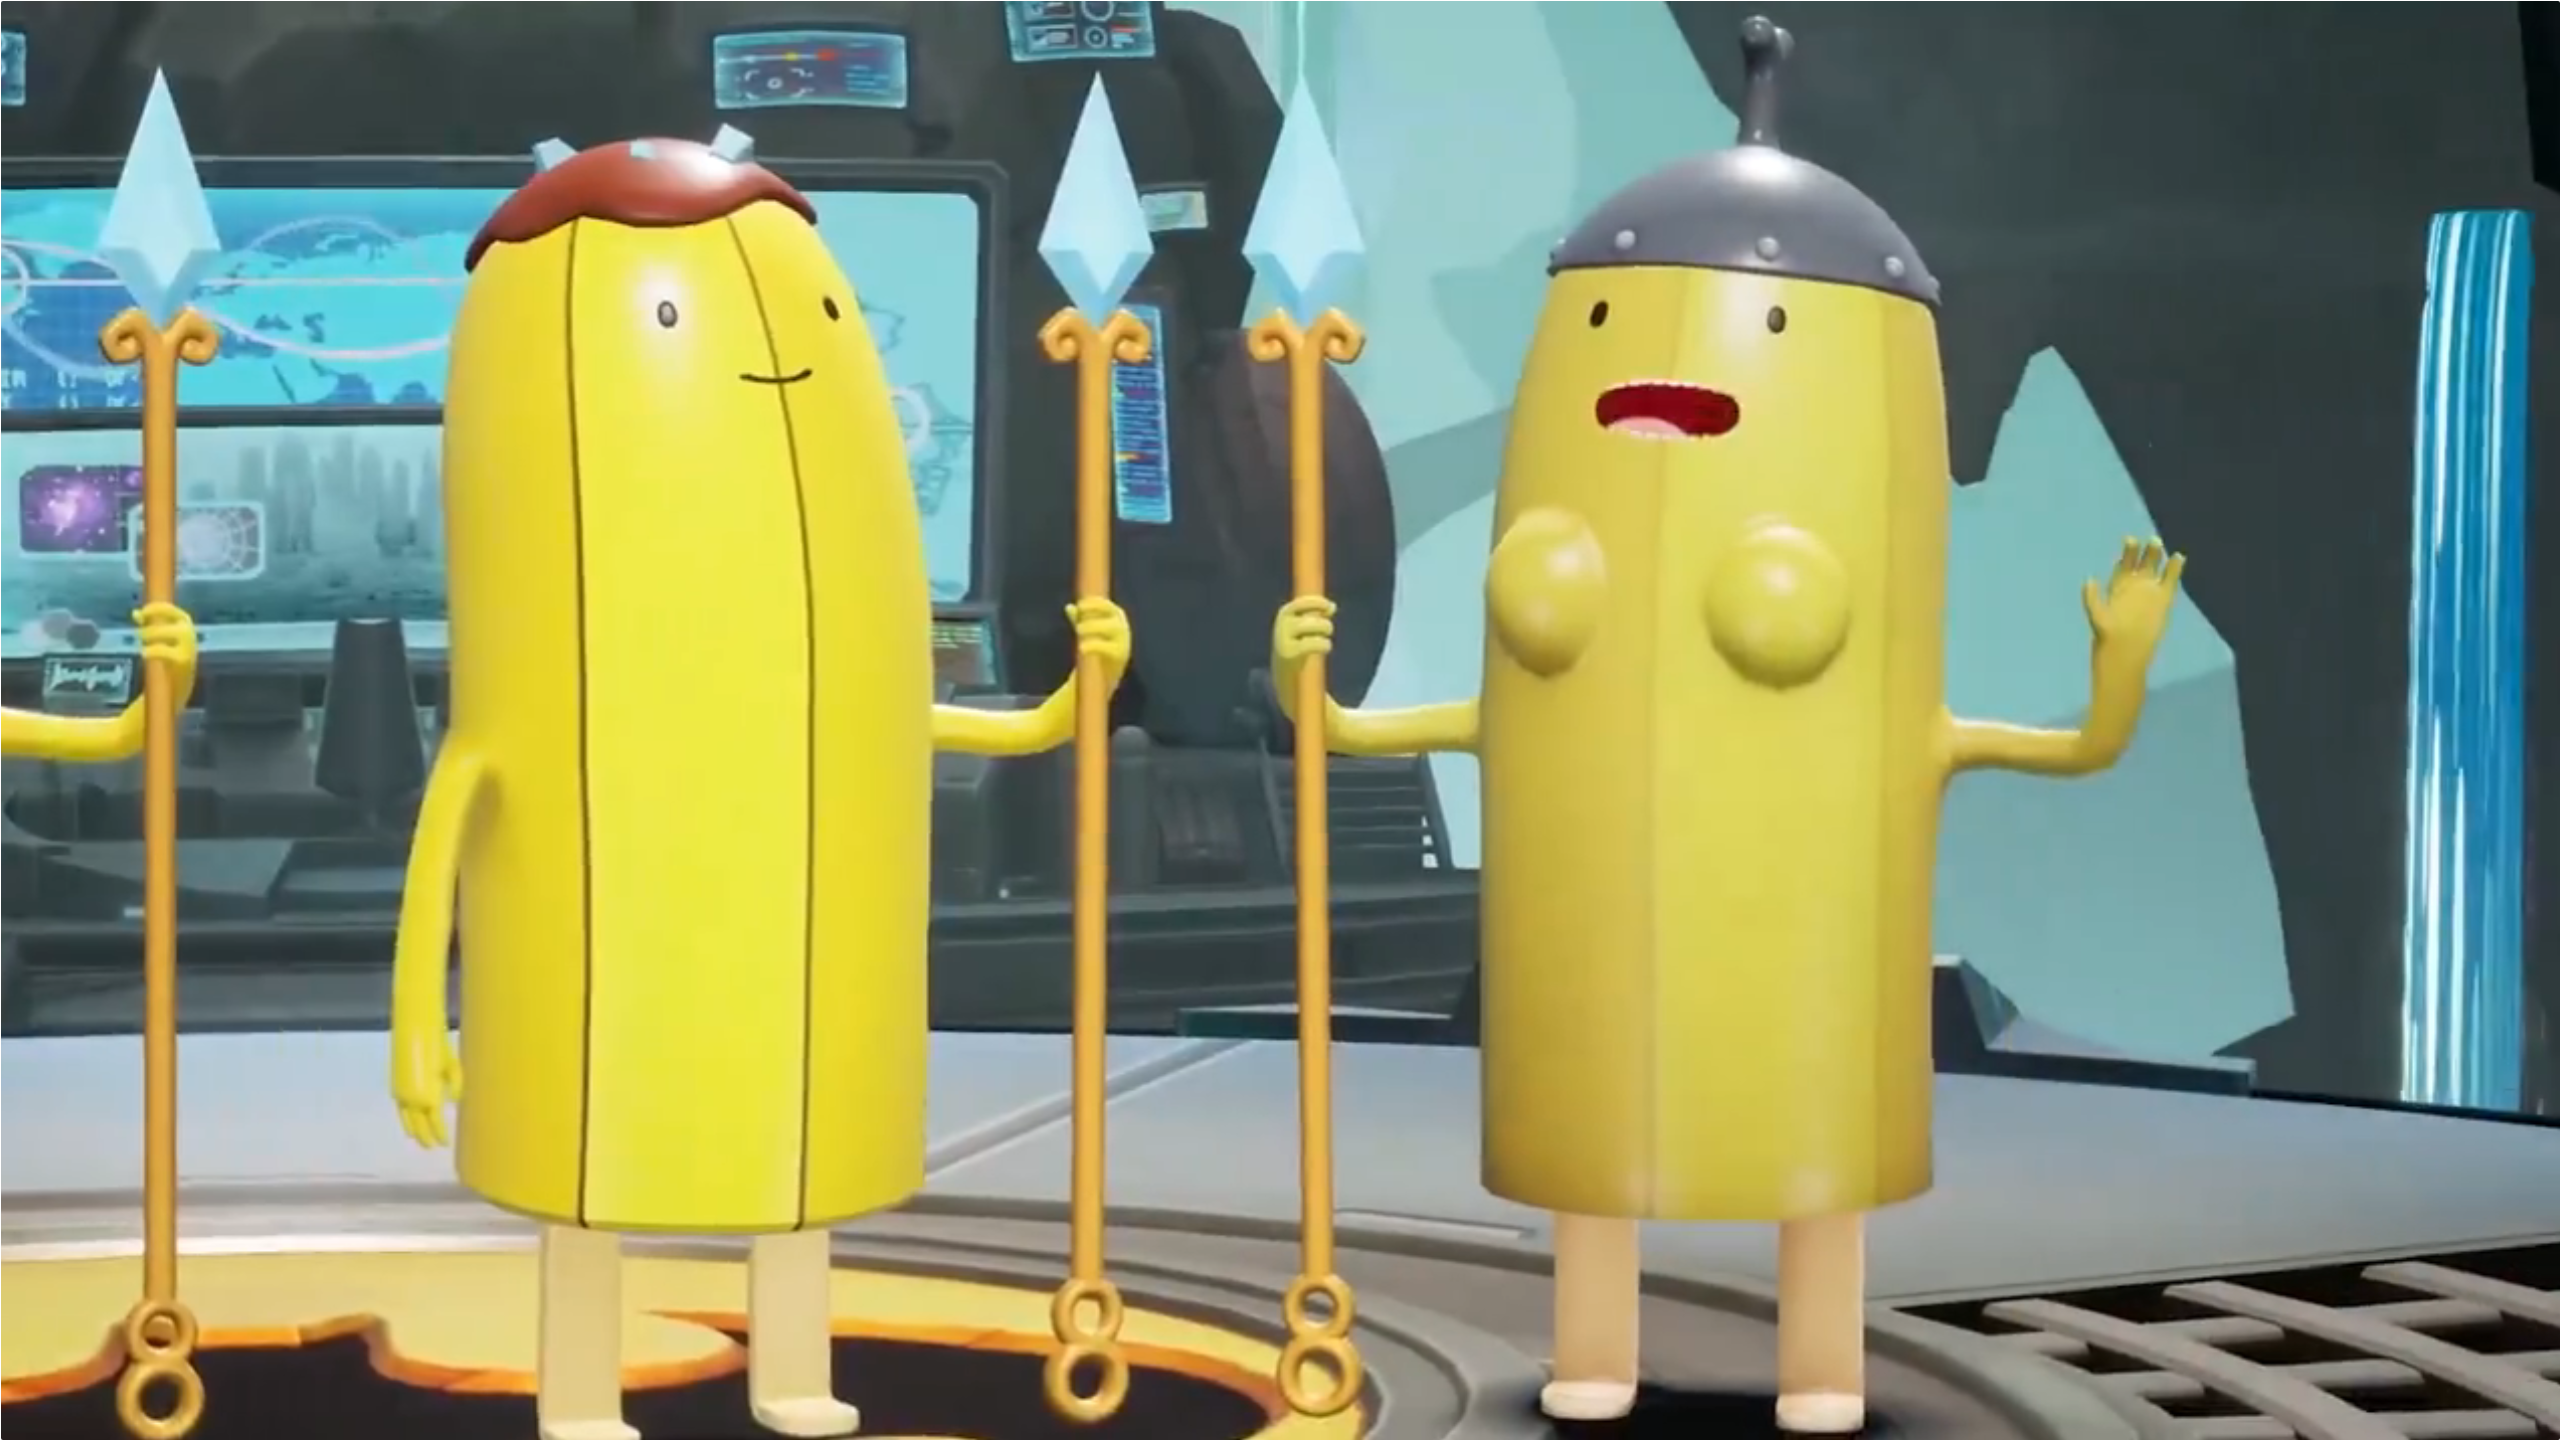 New MultiVersus character is bad news for the guy who said ‘if Banana Guard gets added I will cut my balls off’